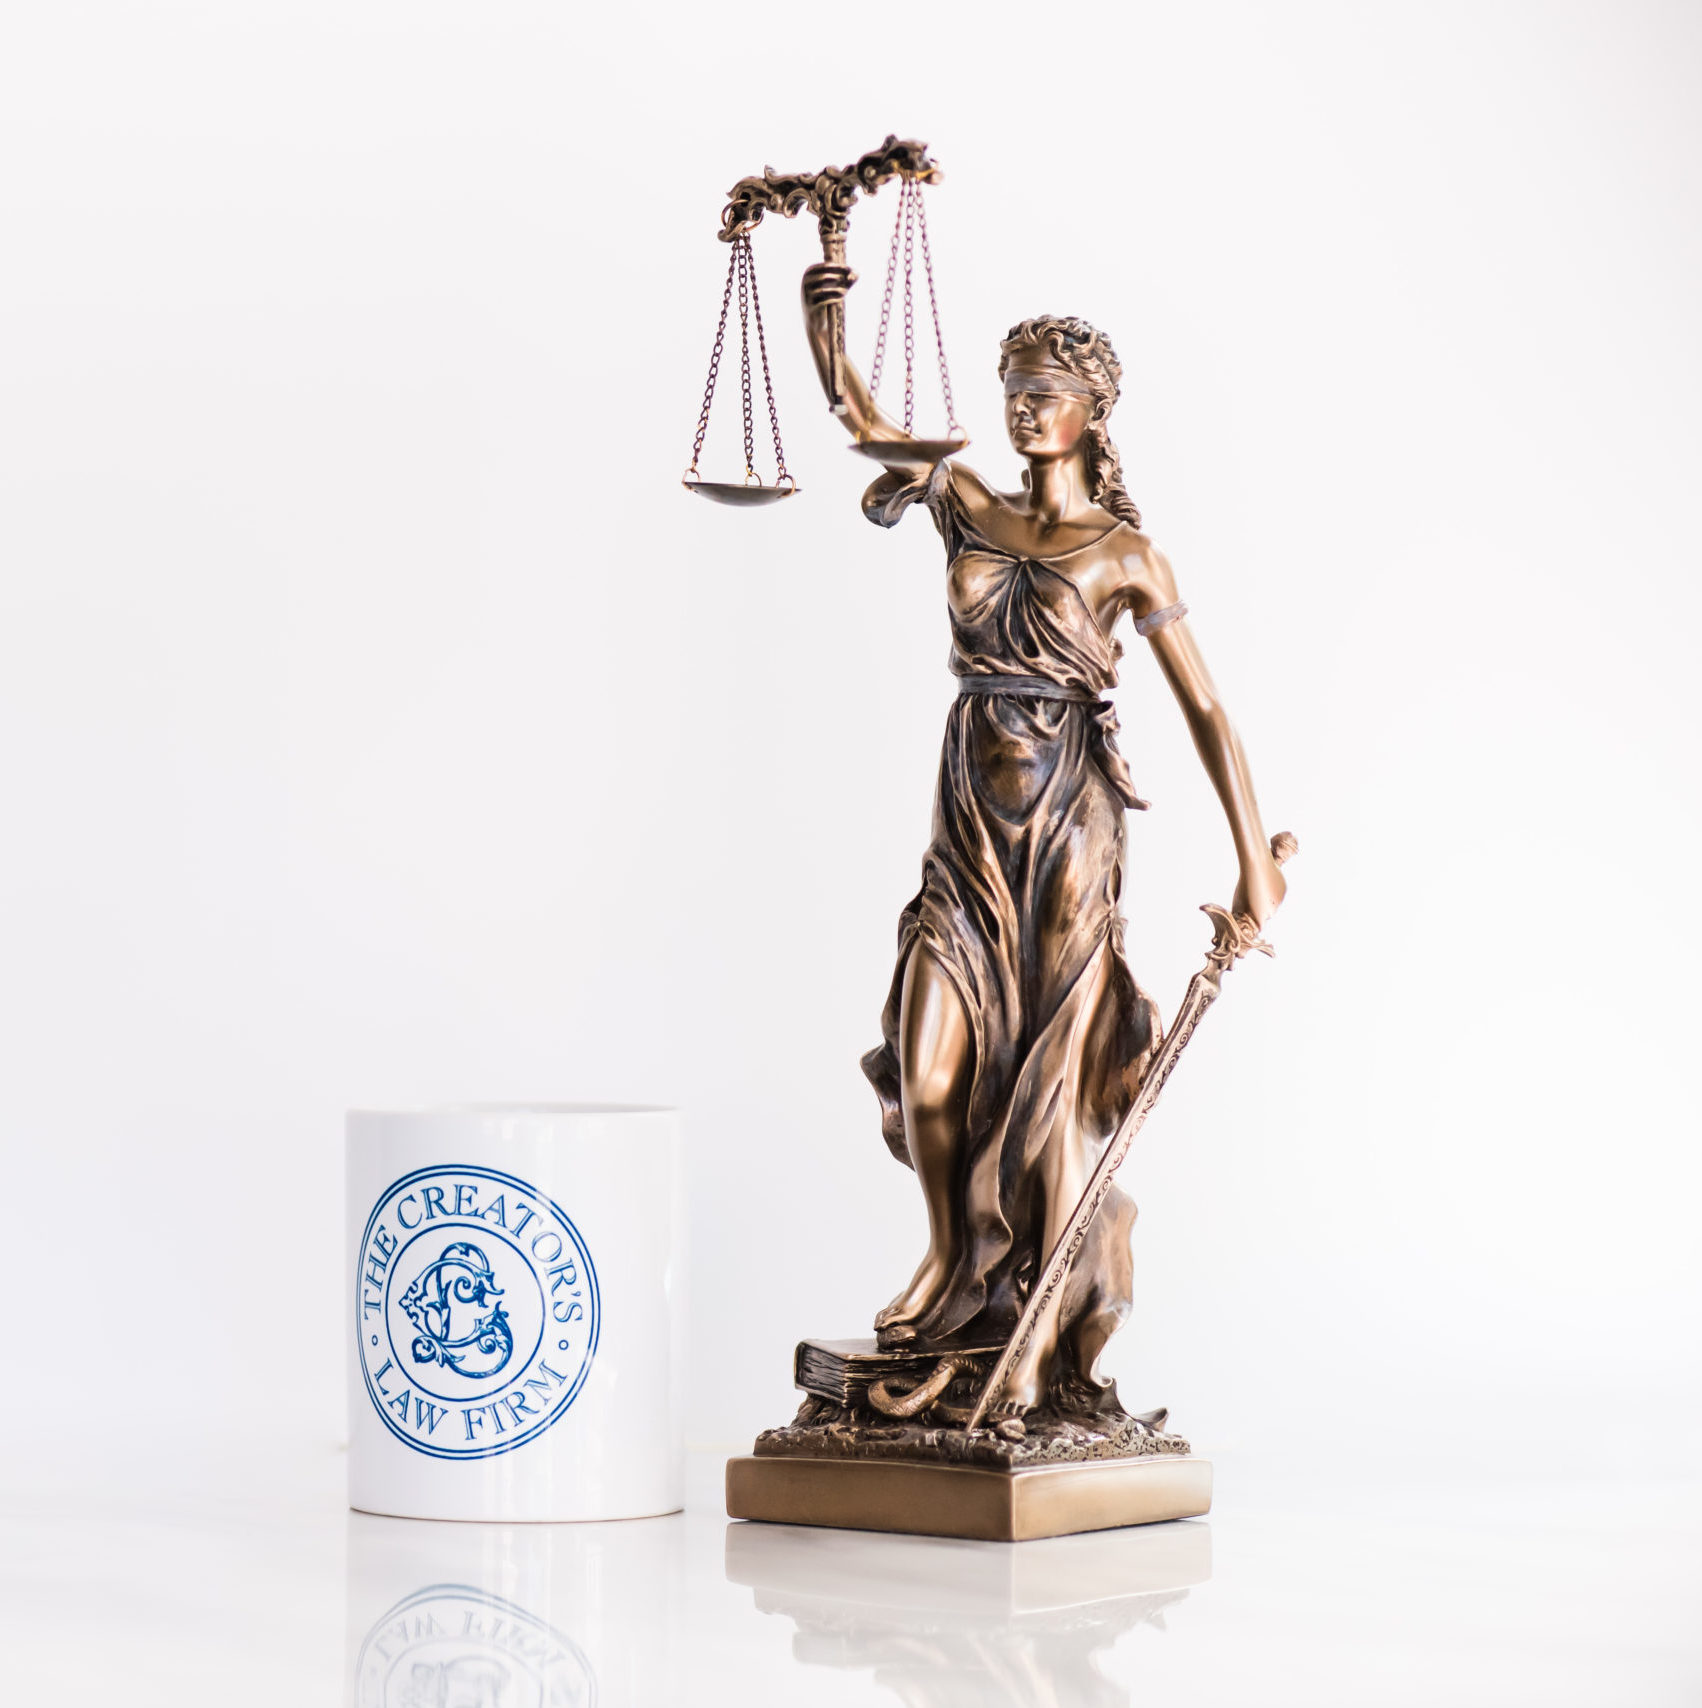 Mini statute of lady justice next to a coffee cup with the creators law firm logo